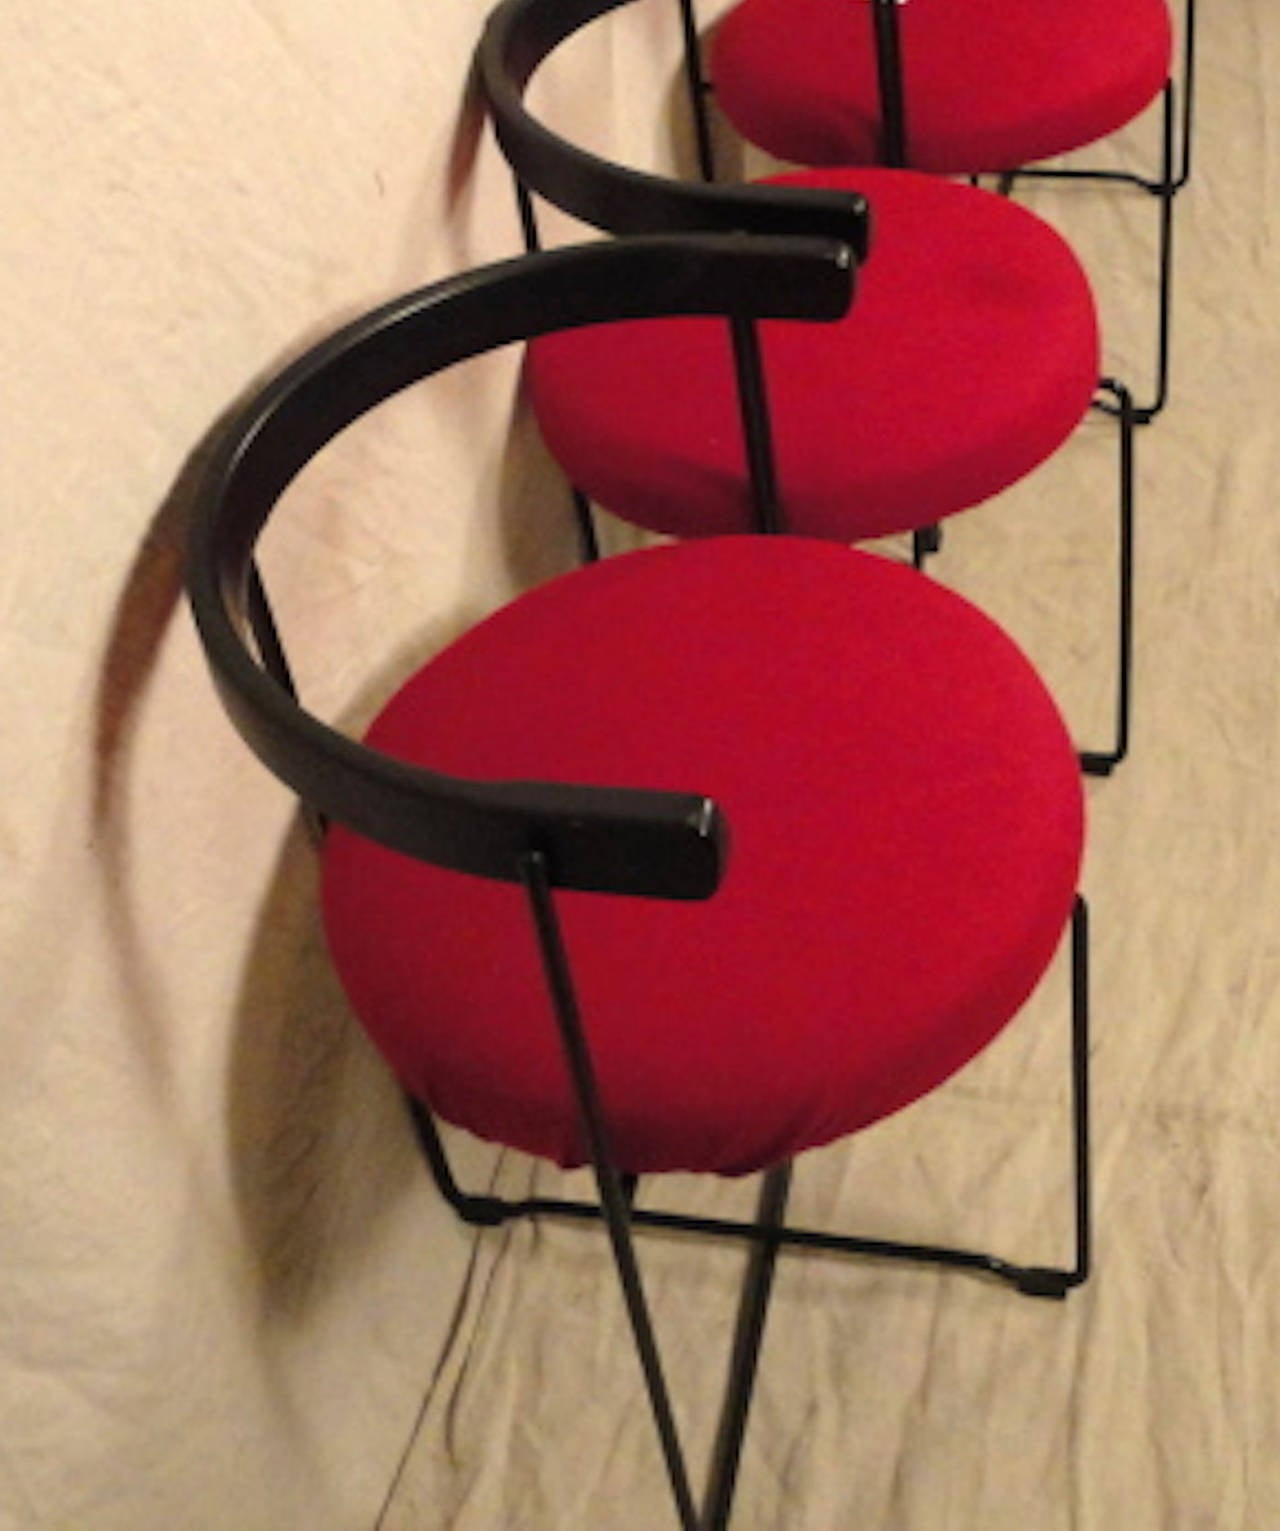 Unusual round back chairs with black wood back, matching iron base and vibrant red seats. Simple shape and style for home or office.

(Please confirm item location - NY or NJ - with dealer)